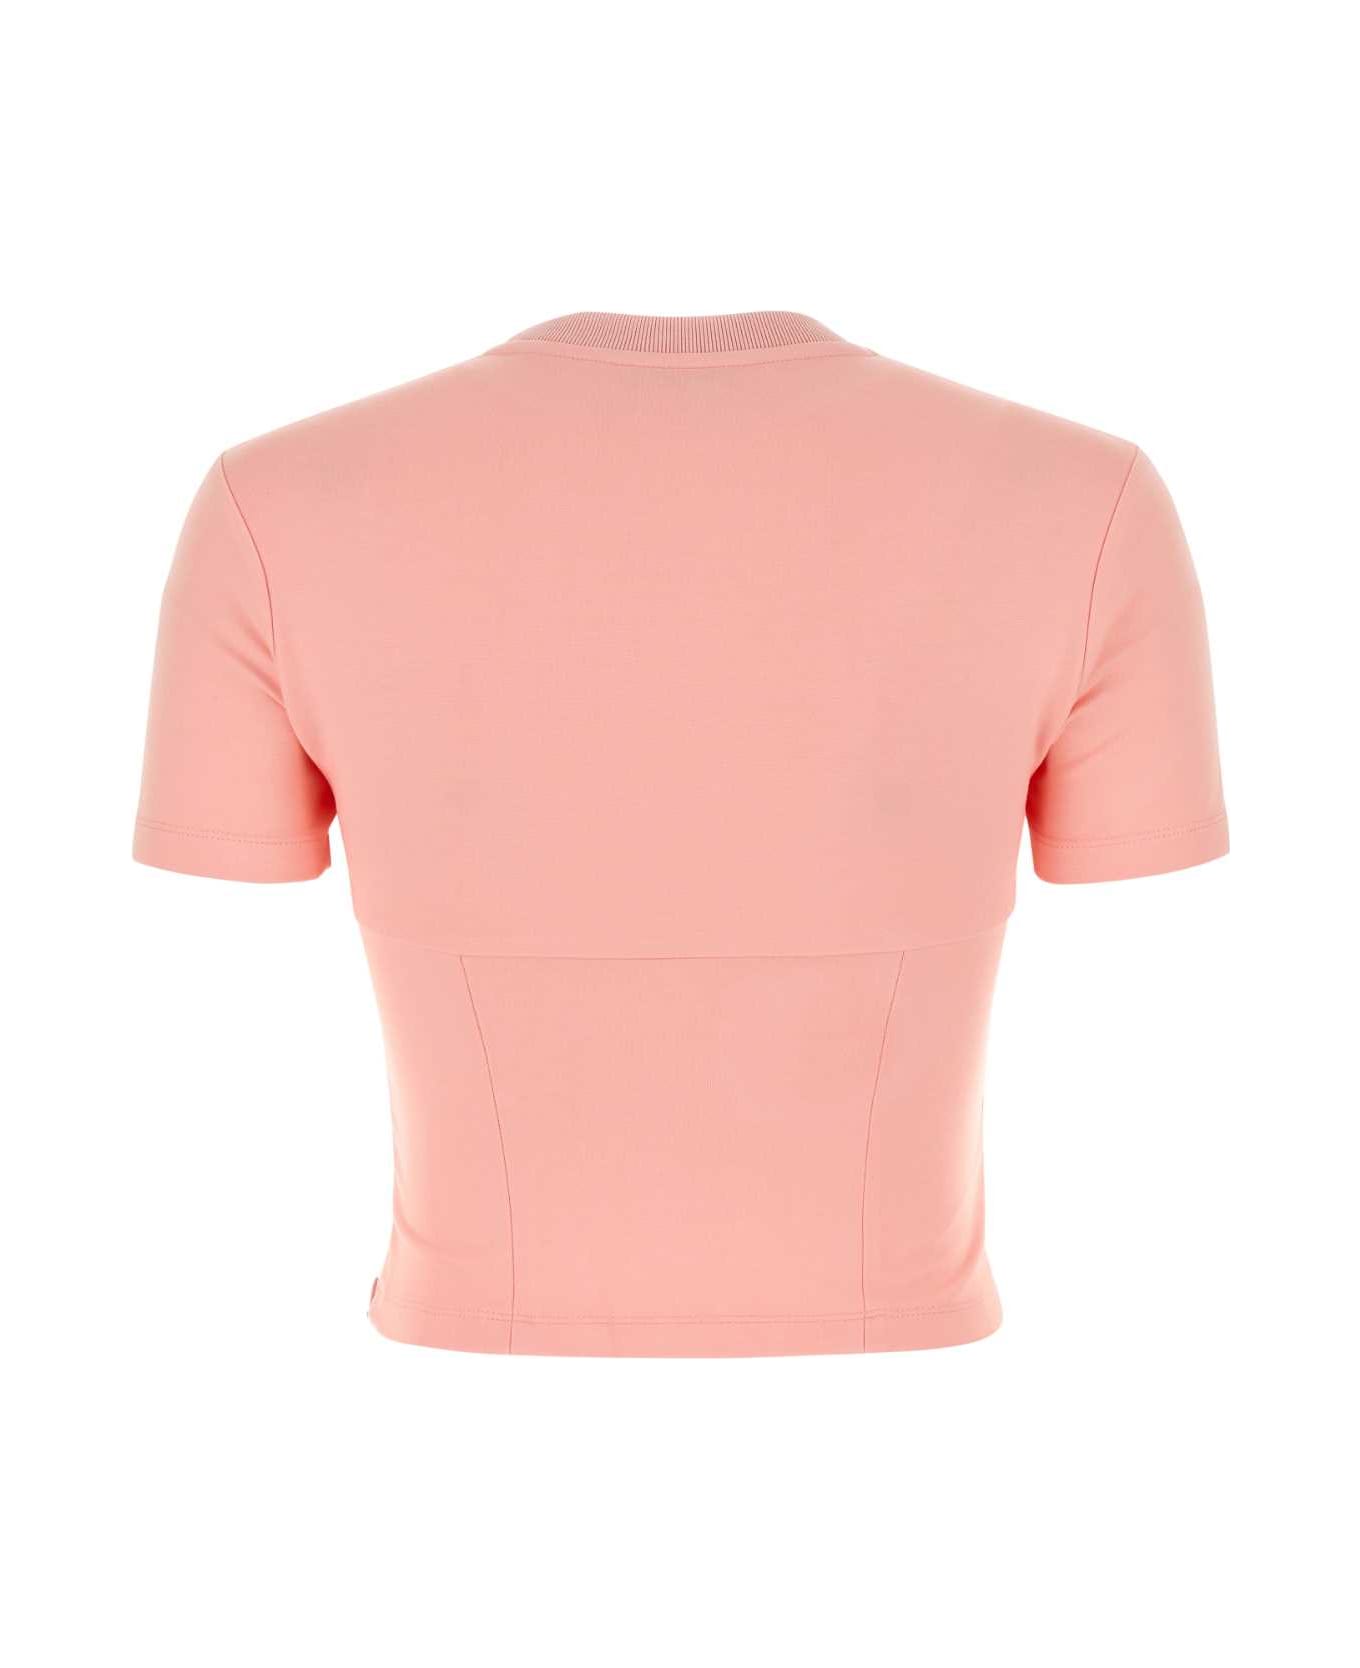 AREA Pink Stretch Jersey T-shirt - CANDYROSE Tシャツ